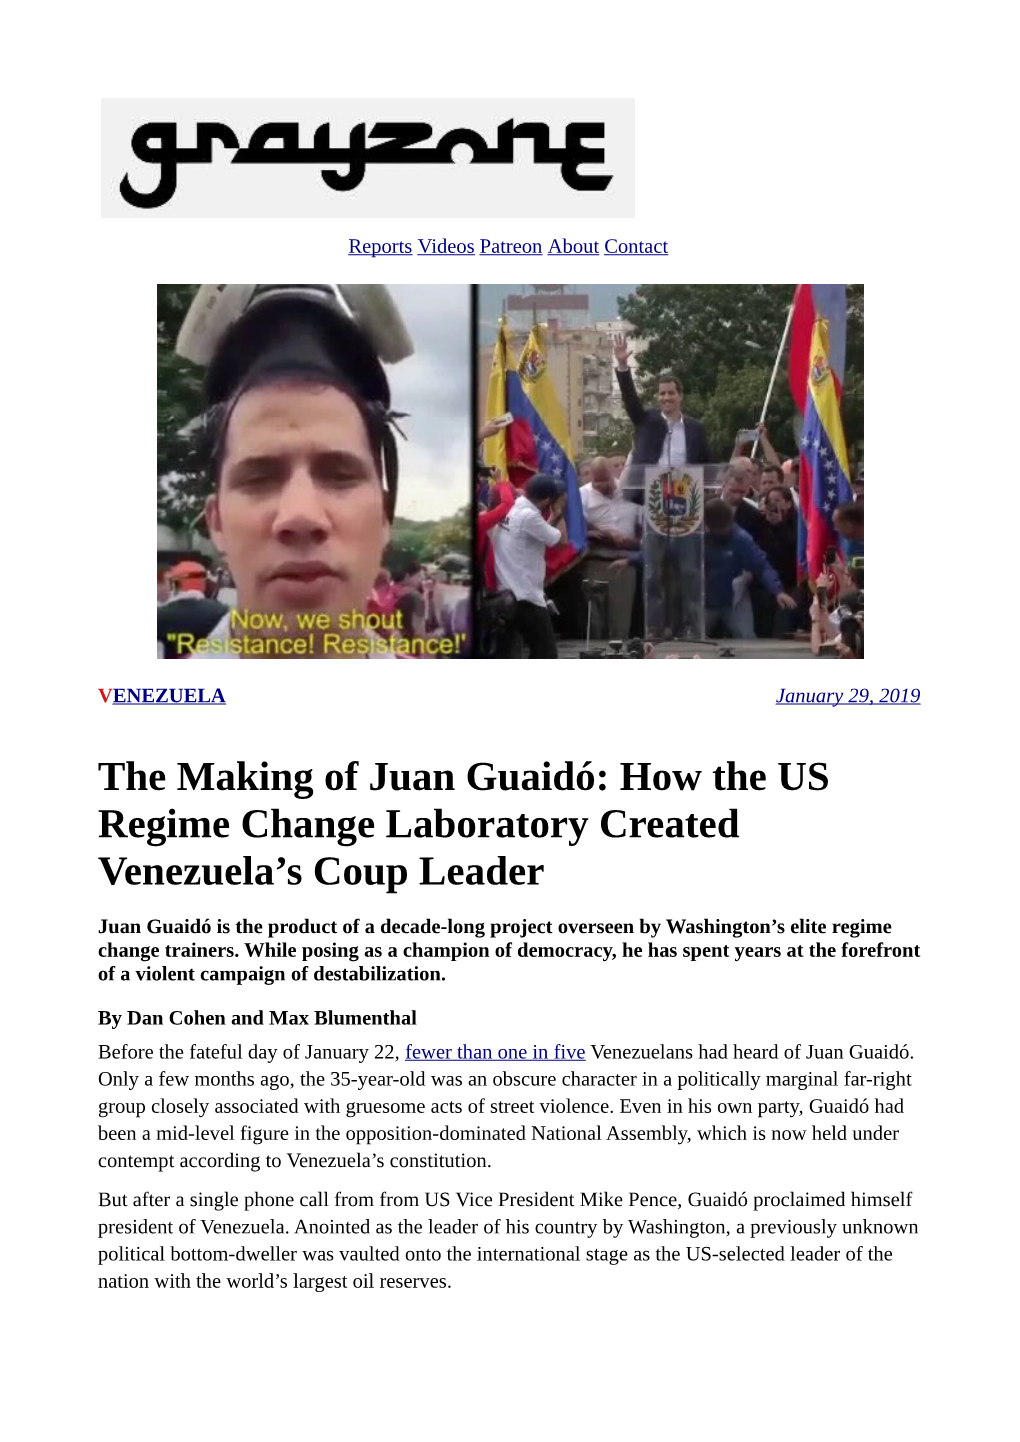 The Making of Juan Guaidó: How the US Regime Change Laboratory Created Venezuela’S Coup Leader